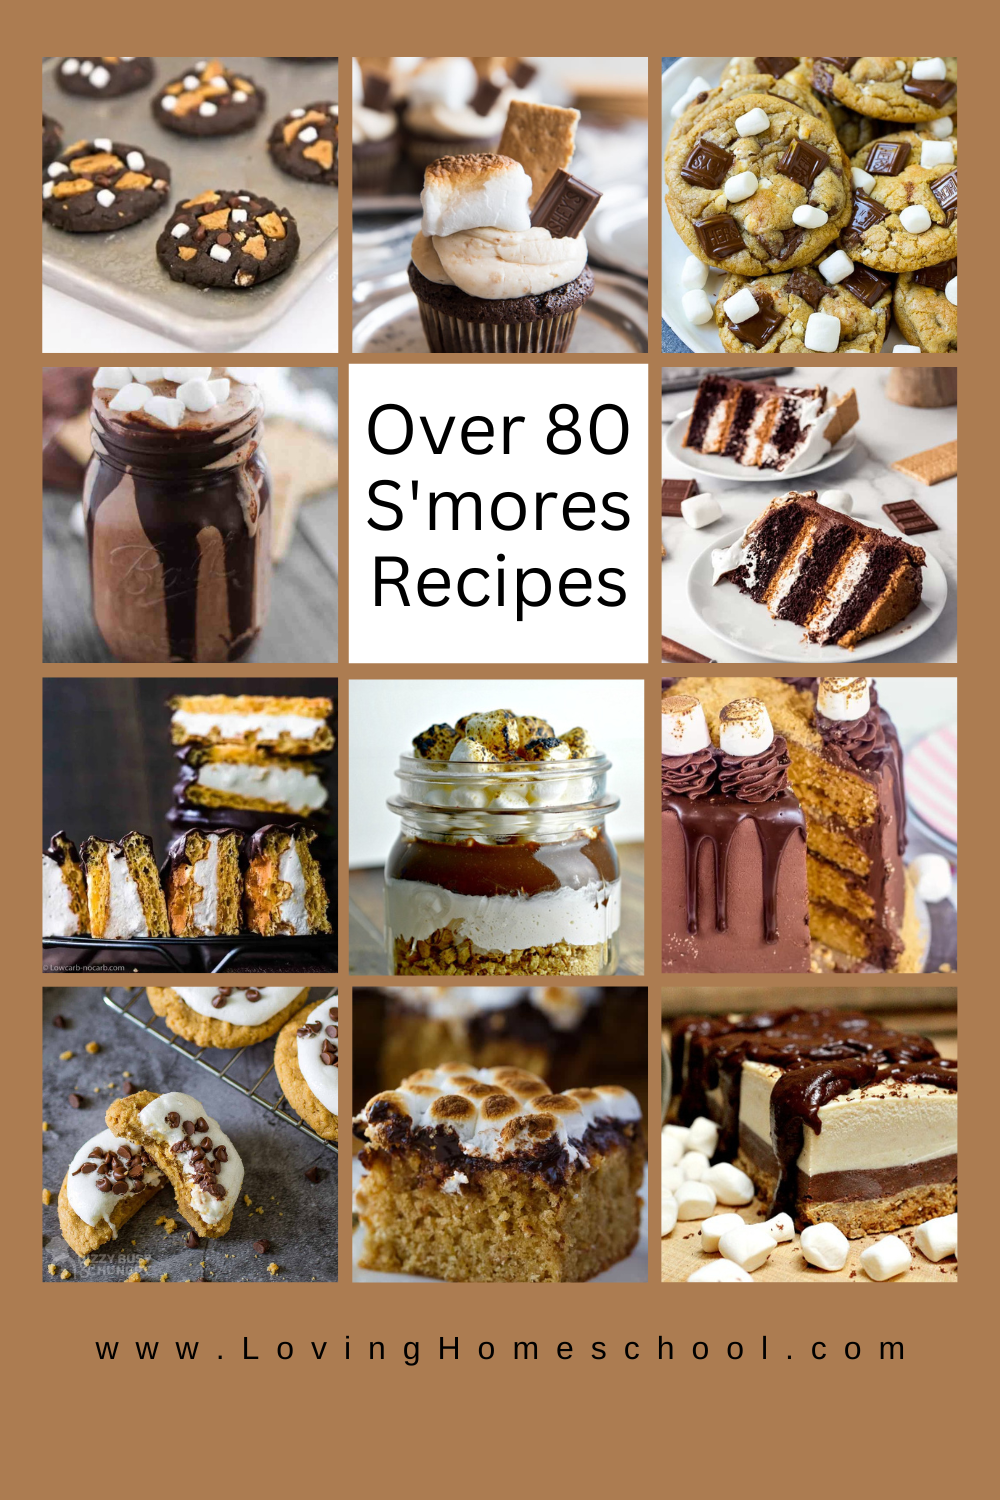 Over 80 S'mores Recipes Pinterest Pin